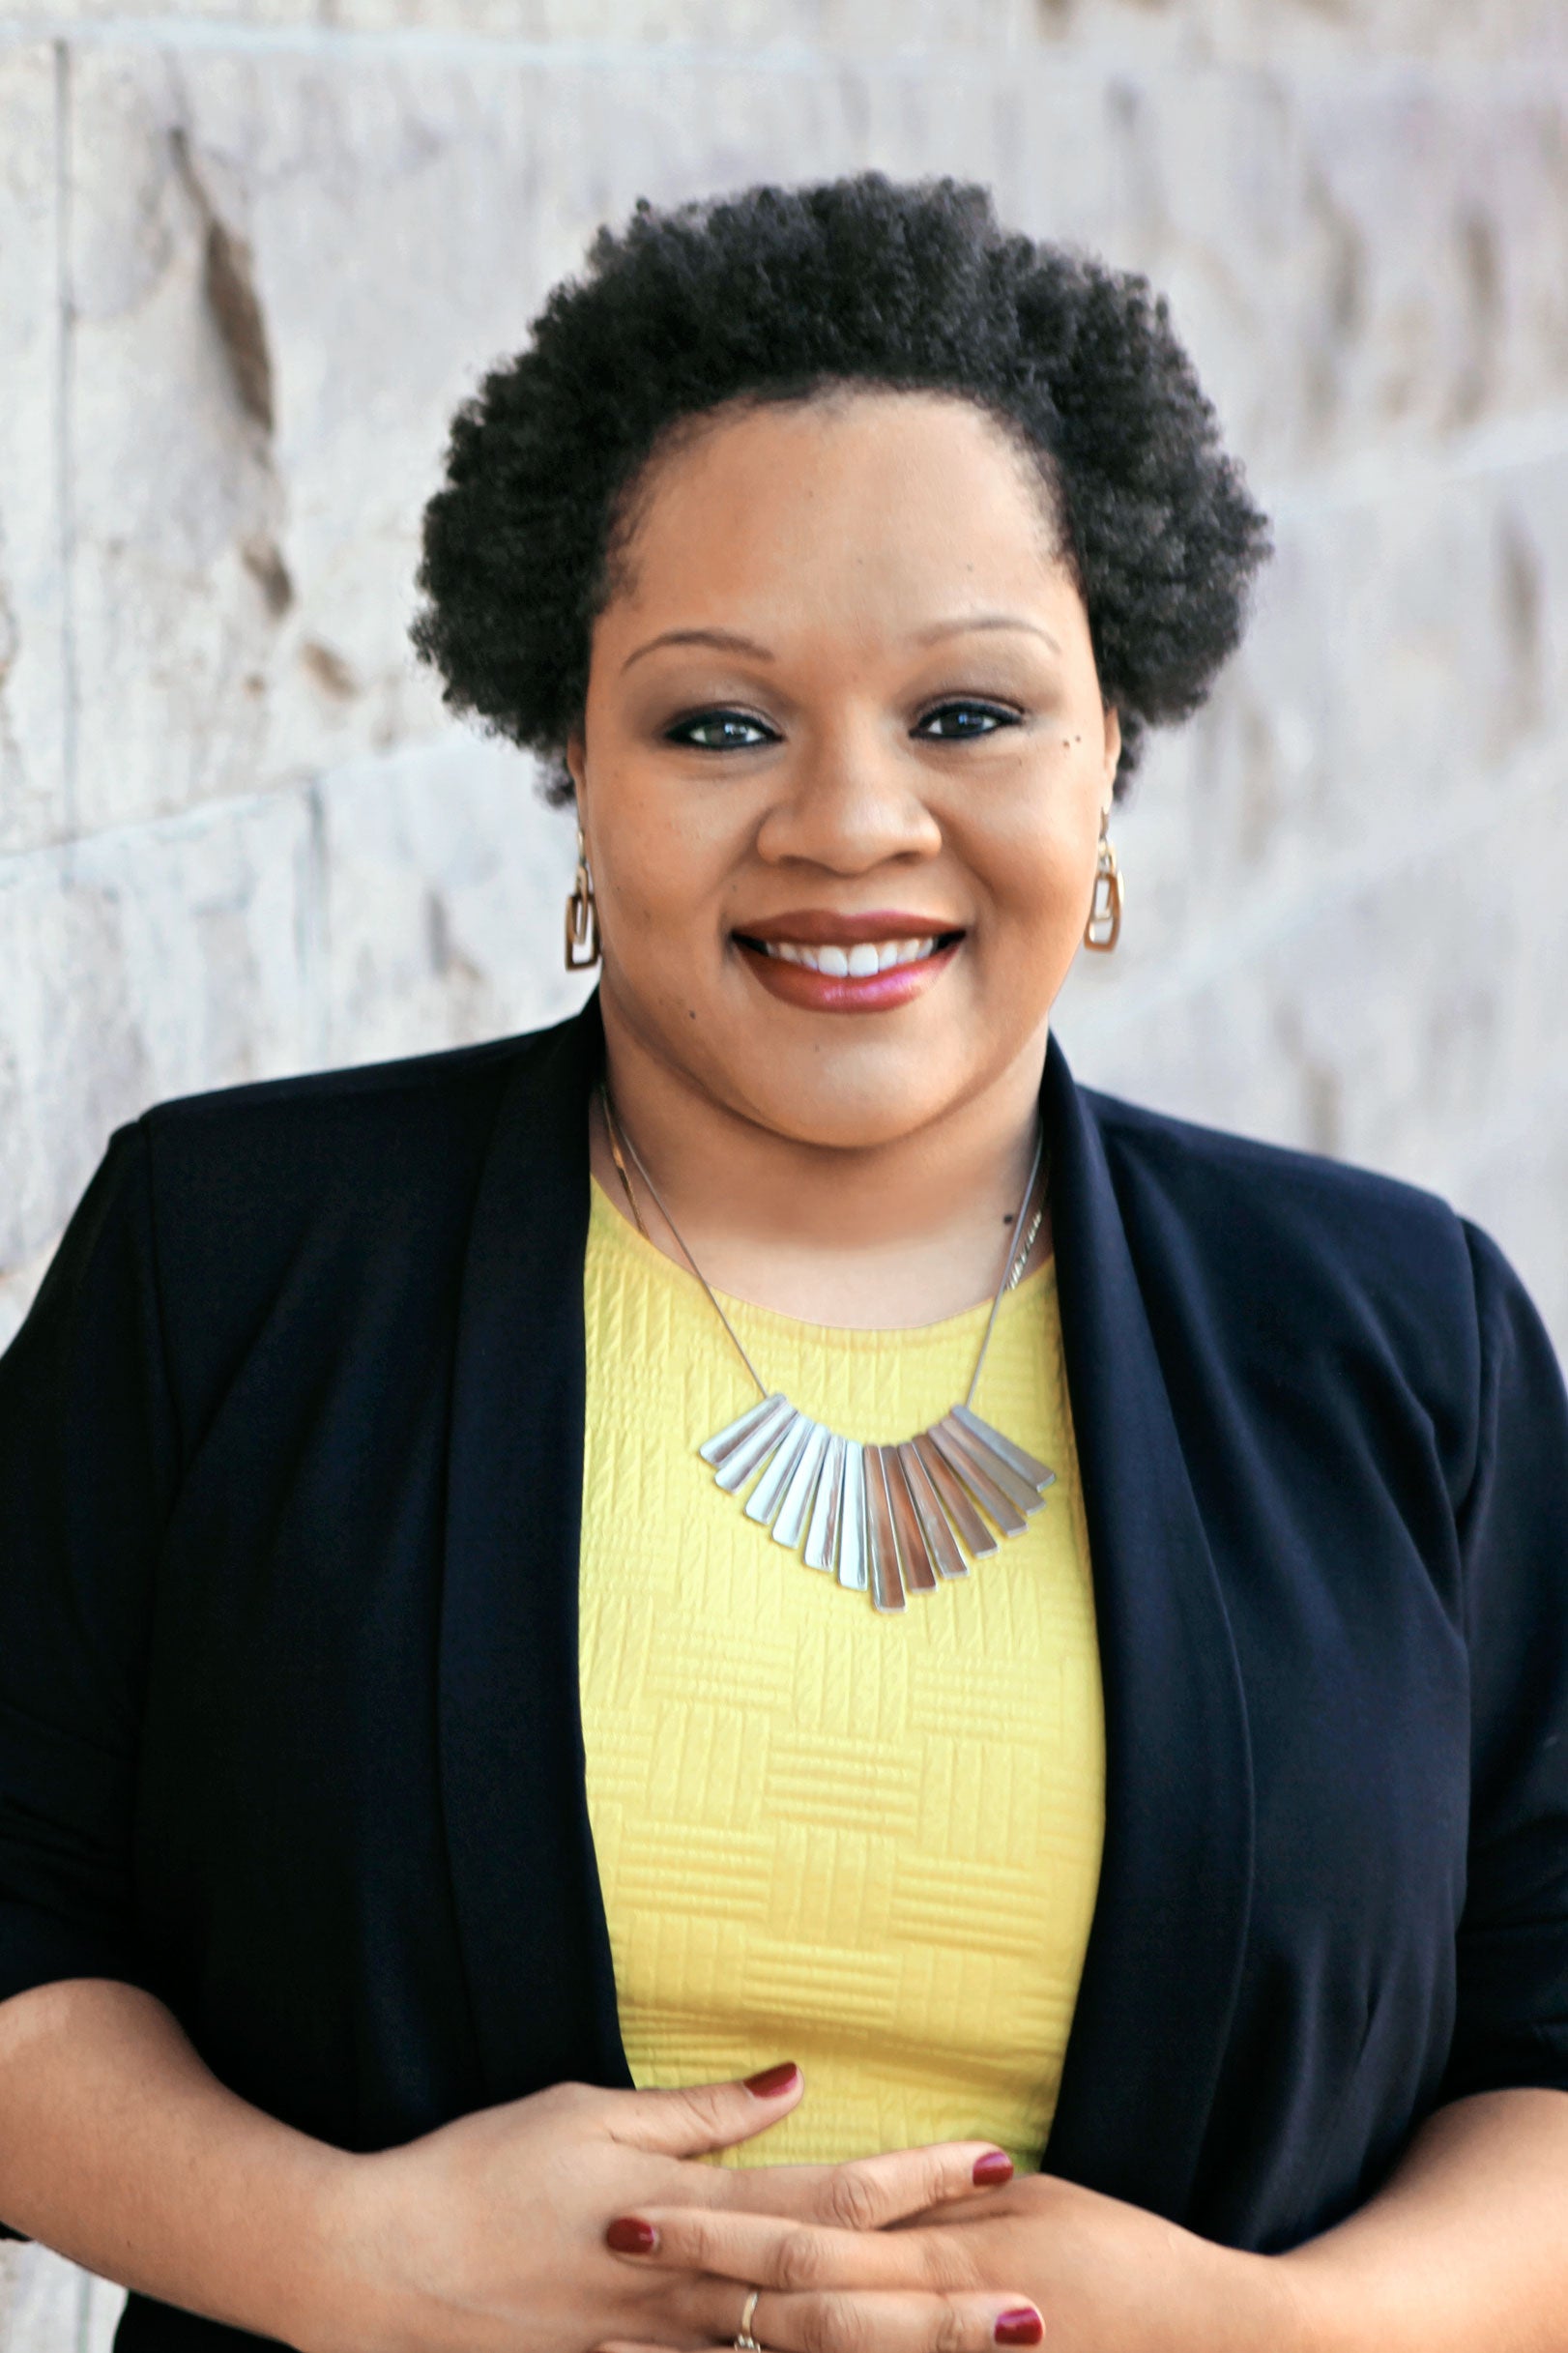 Journalist Yamiche Alcindor Is Giving A Voice To The Voiceless